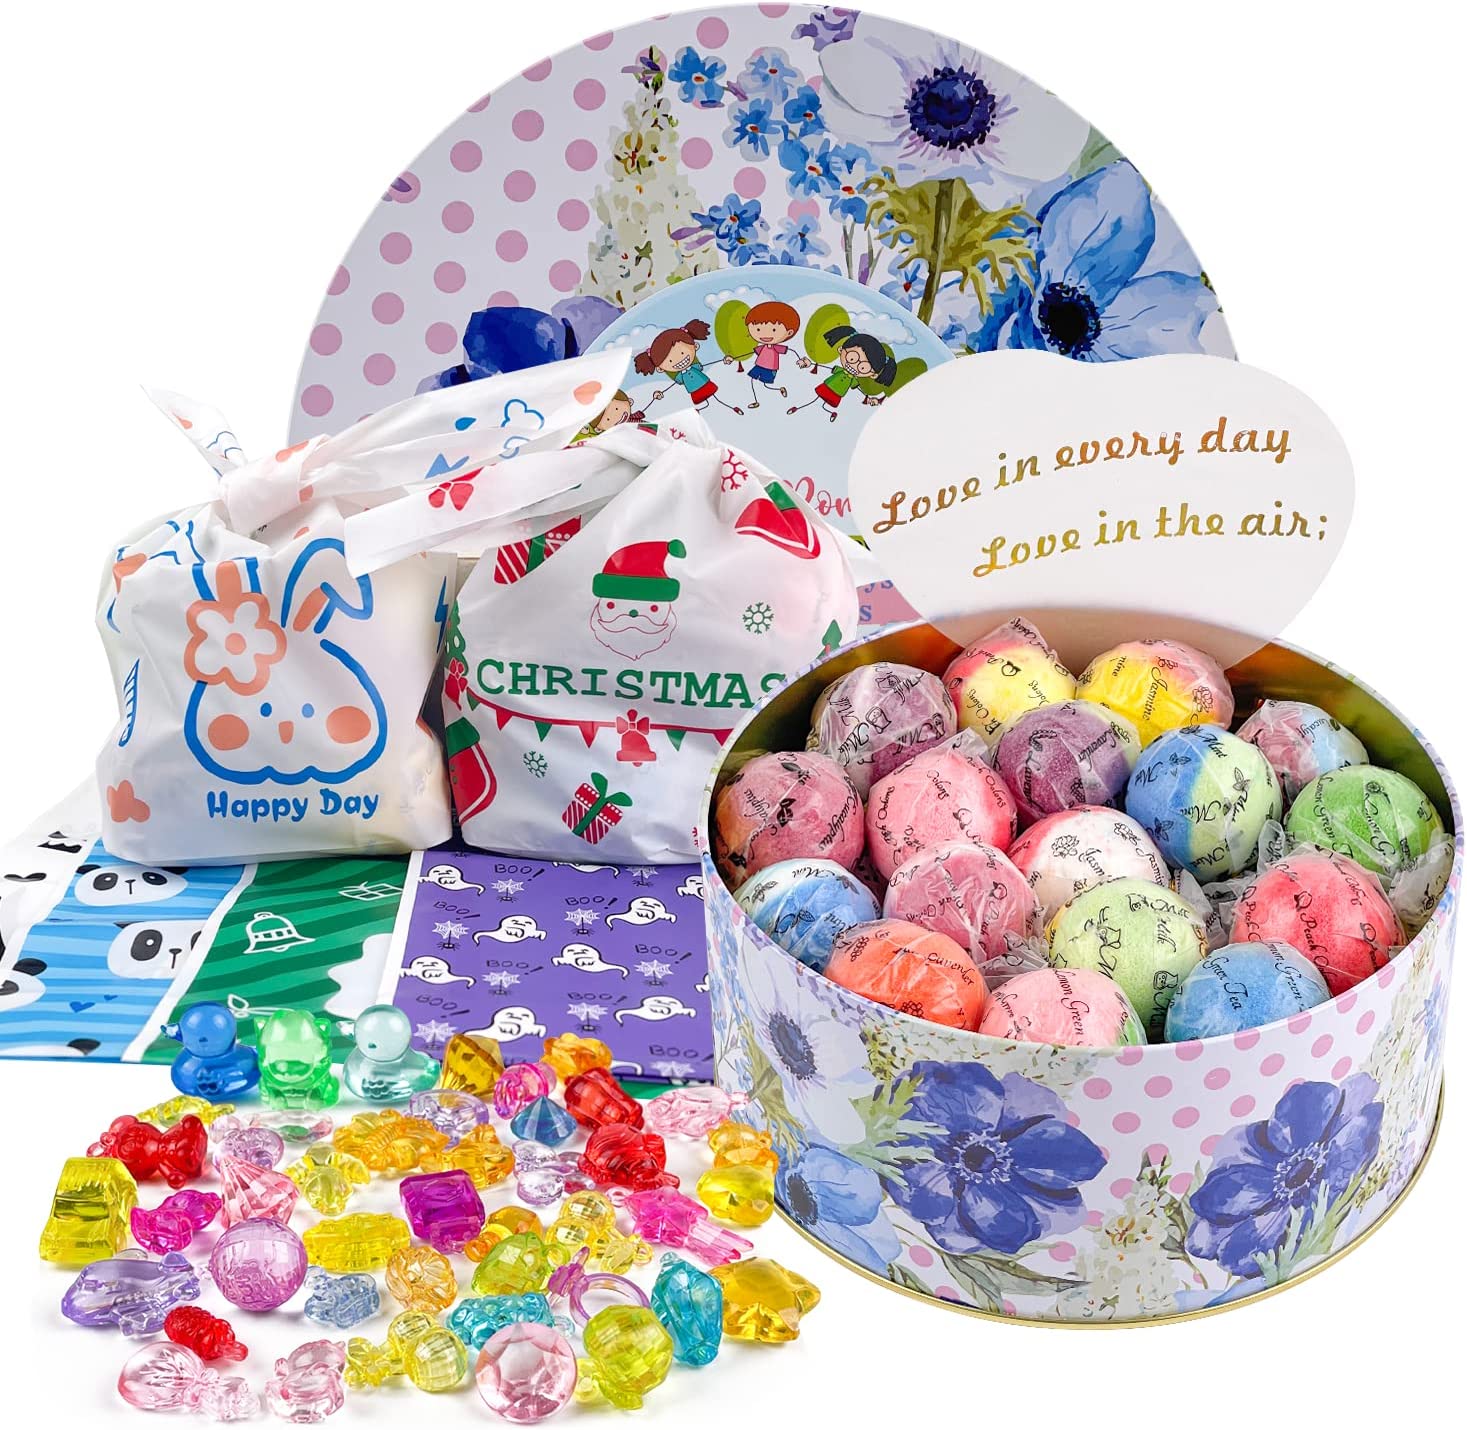 Bath Bombs With Crystal Toys Inside For Kids Girls